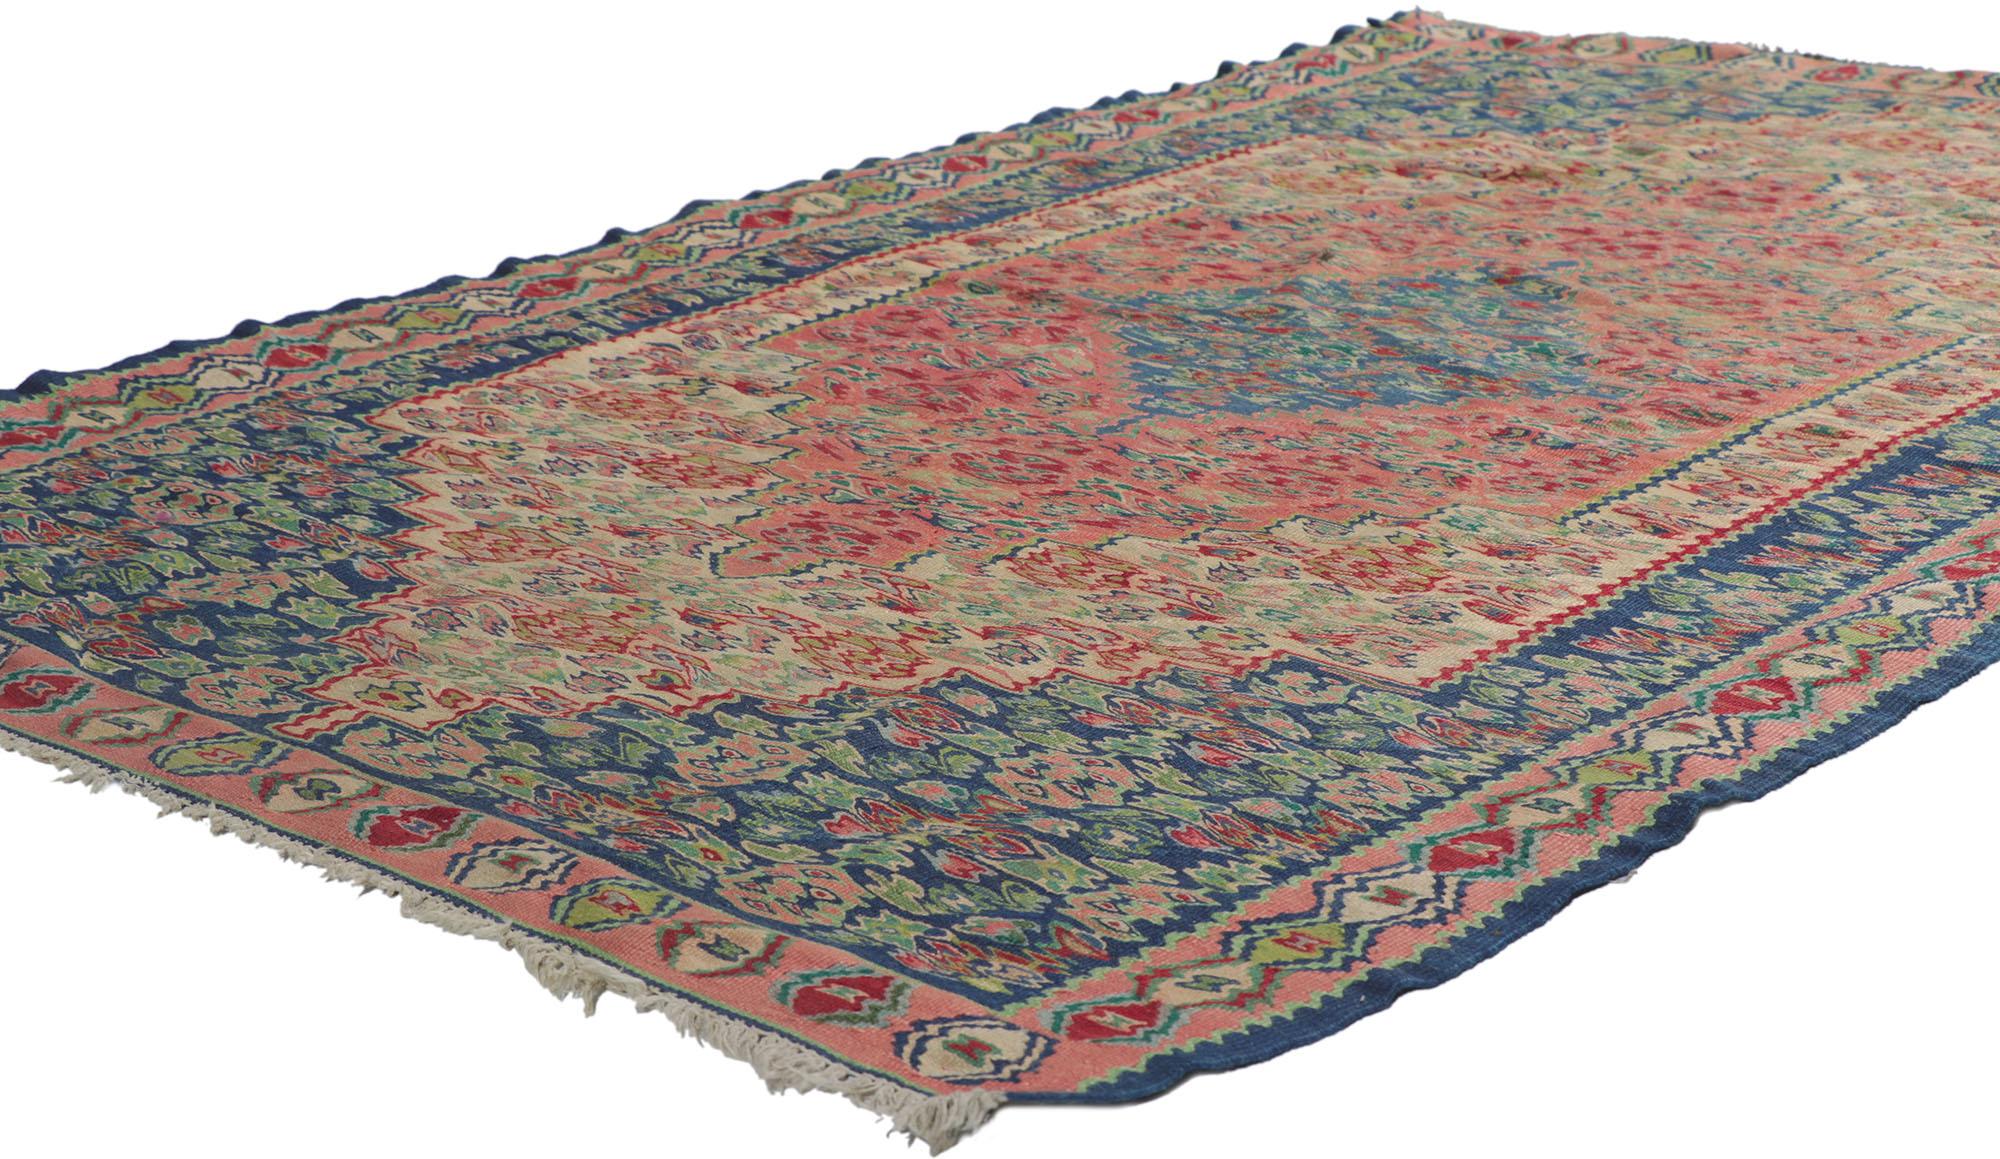 78212 vintage Persian Bijar Kilim rug with Cottage Style 03'11 x 06'04. Effortless beauty and simplicity, this hand-woven wool vintage Persian Bijar kilim rug gives a lively and light hearted feel with its bucolic charm. The abrashed field features